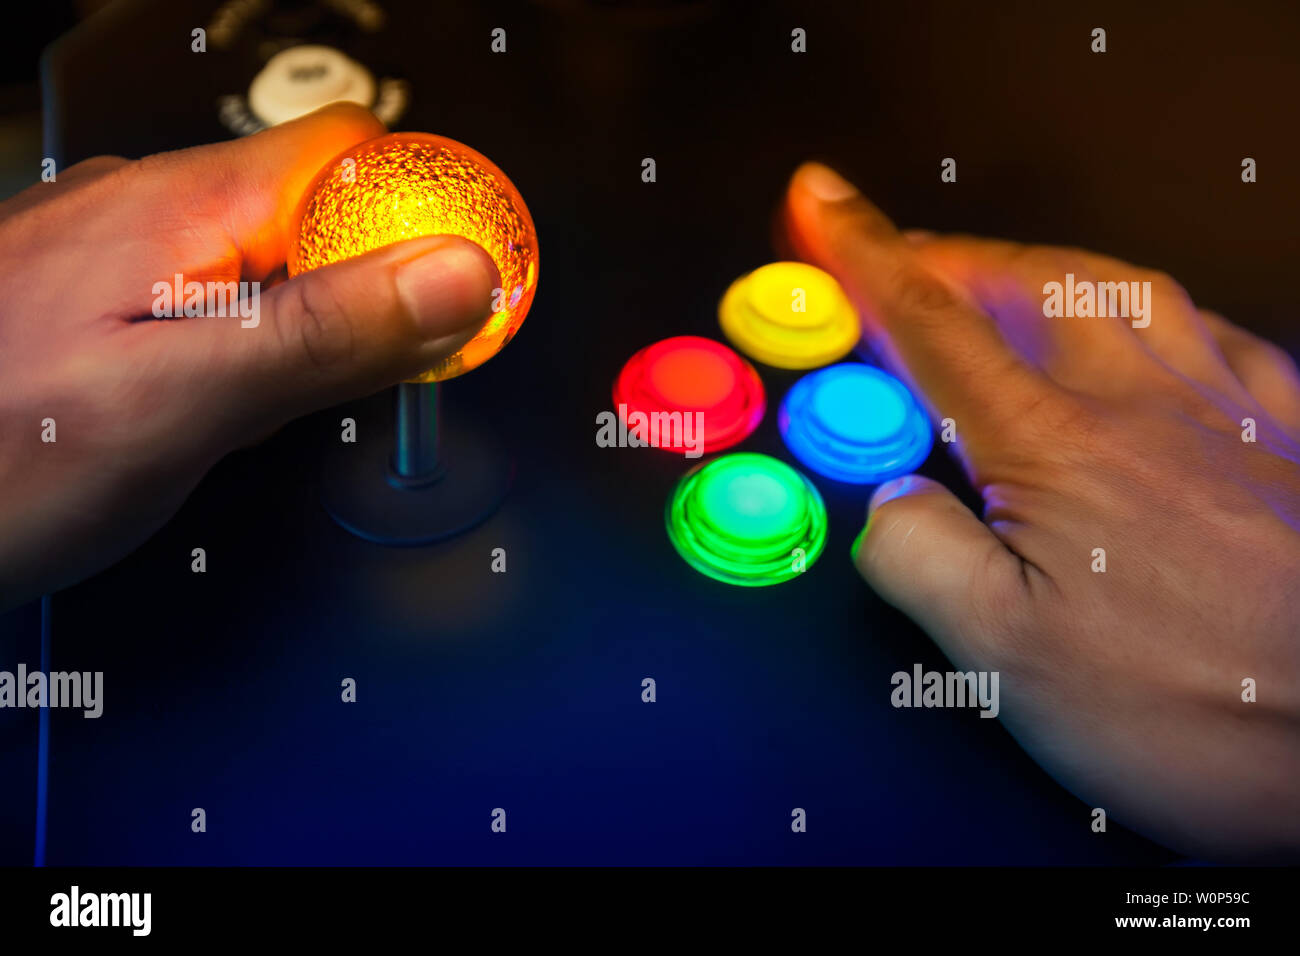 Lighted arcade bubble top joystick and buttons being played by retro gamer. Stock Photo